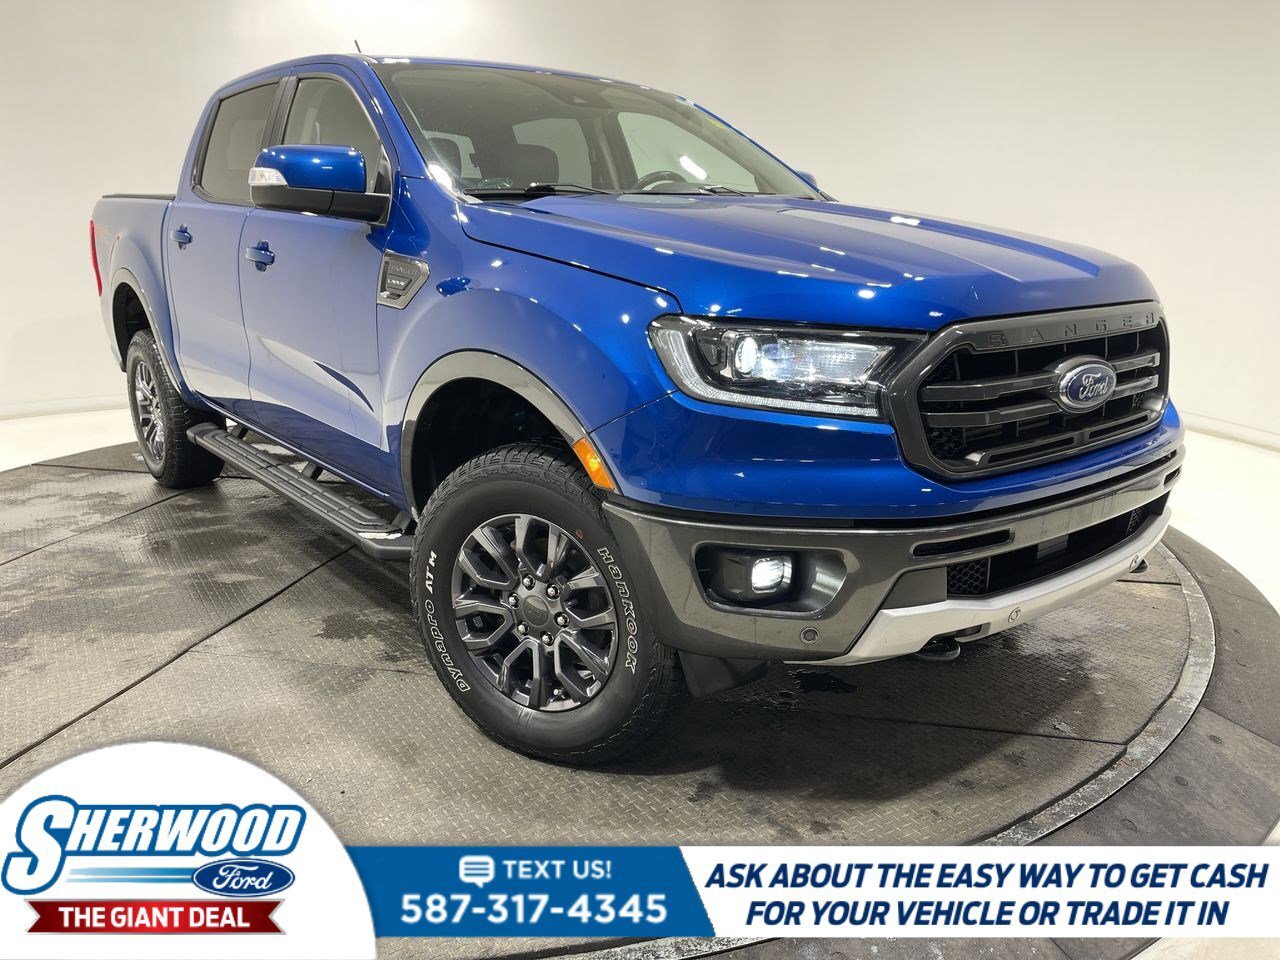 2019 Ford Ranger Lariat- $0 Down $171 Weekly- TECH & TOW PKGS